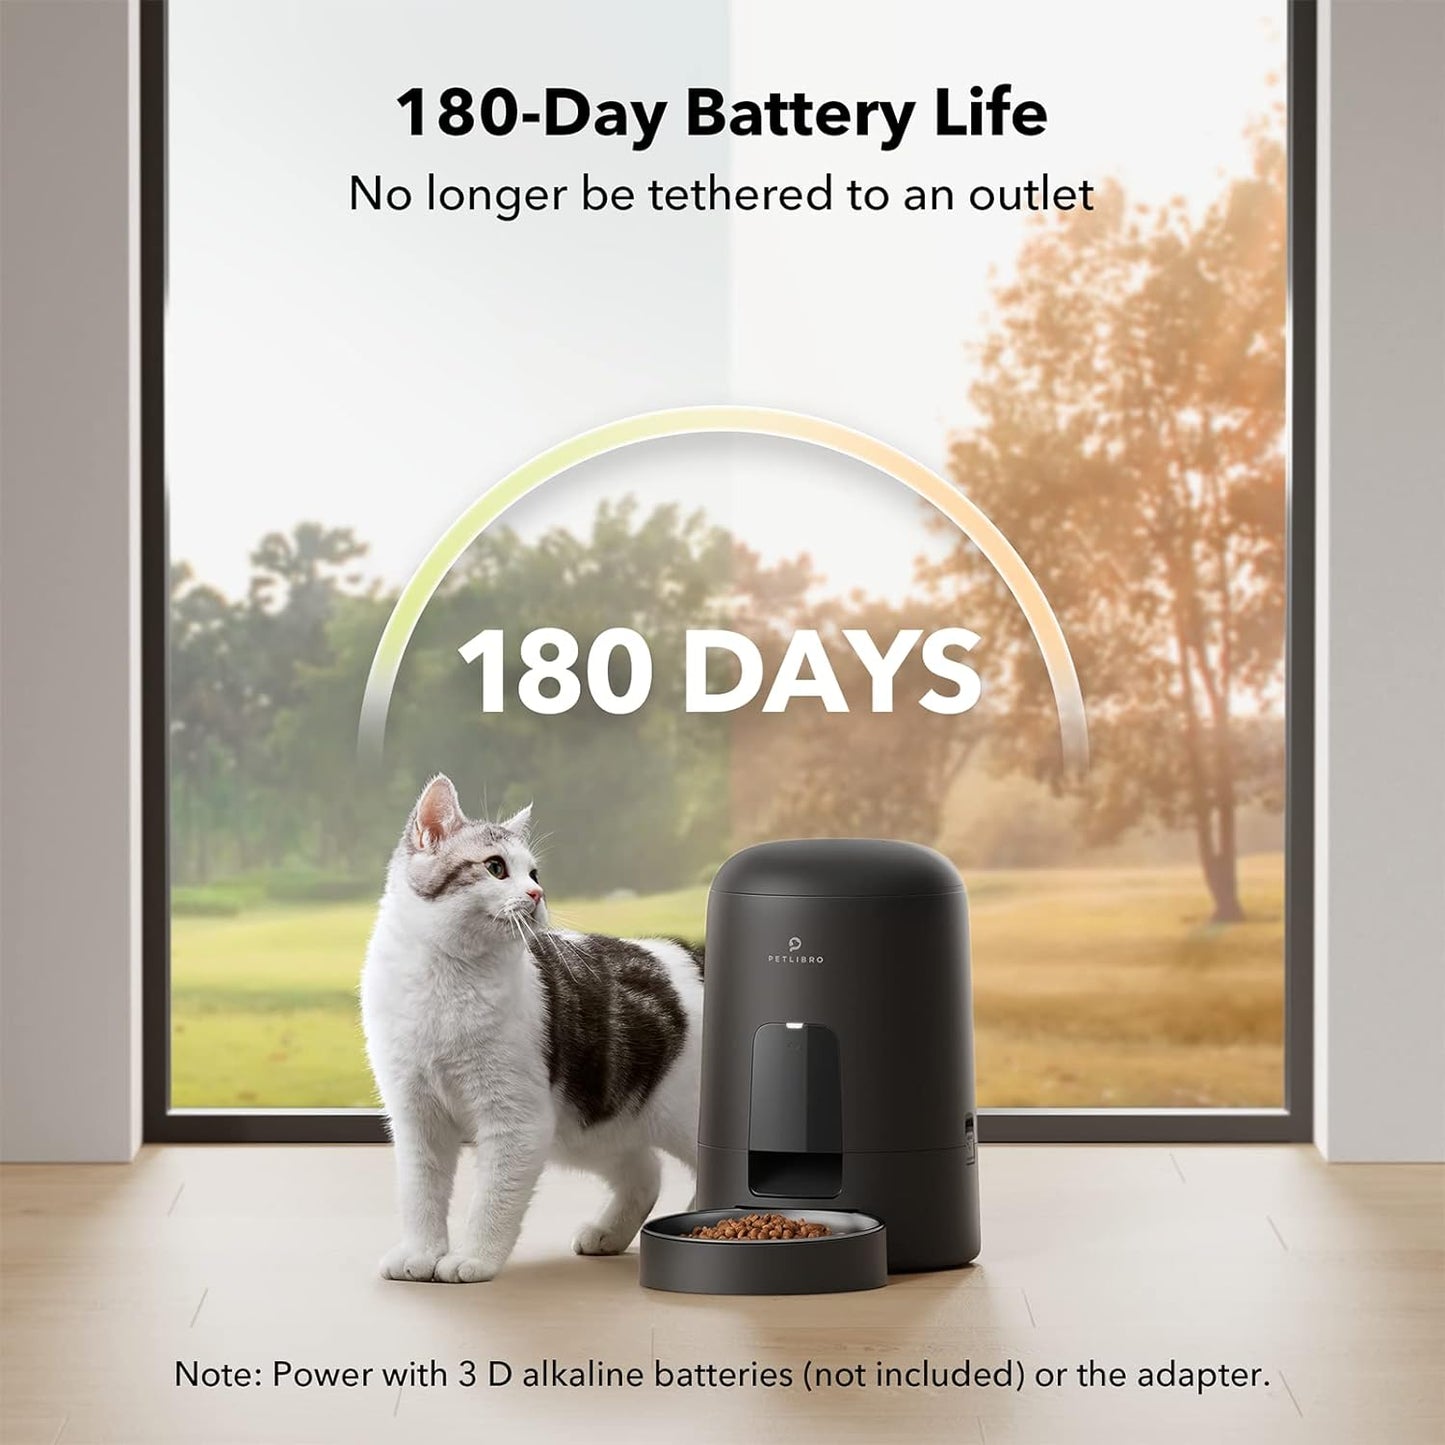 Automatic Cat Feeder, Automatic Cat Food Dispenser Battery-Operated with 180-Day Battery Life, AIR Pet Feeder for Cat & Dog, Timed Cat Feeder Program 1-6 Meals Control, 2L Auto Cat Feeder